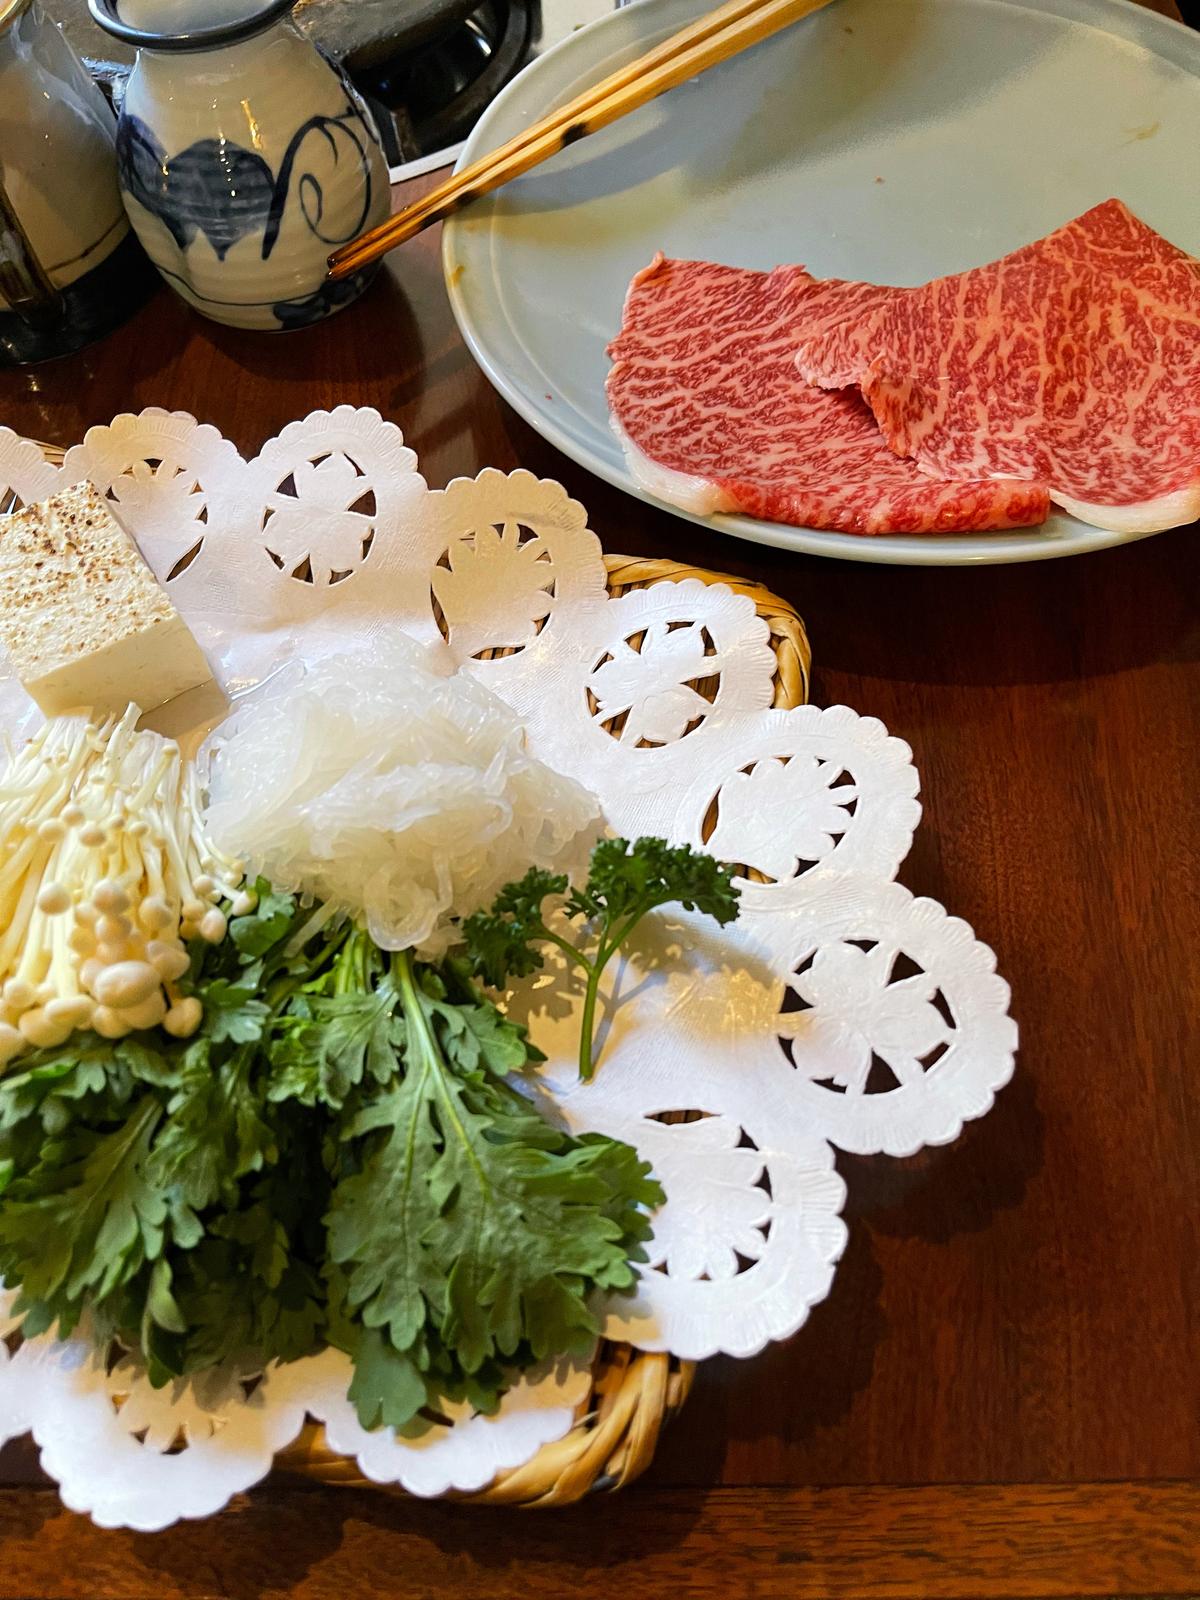 Platters of richly marbled slices of beef, chrysanthemum greens, noodles, mushrooms, and tofu are at the ready. (Melissa Uchiyama)